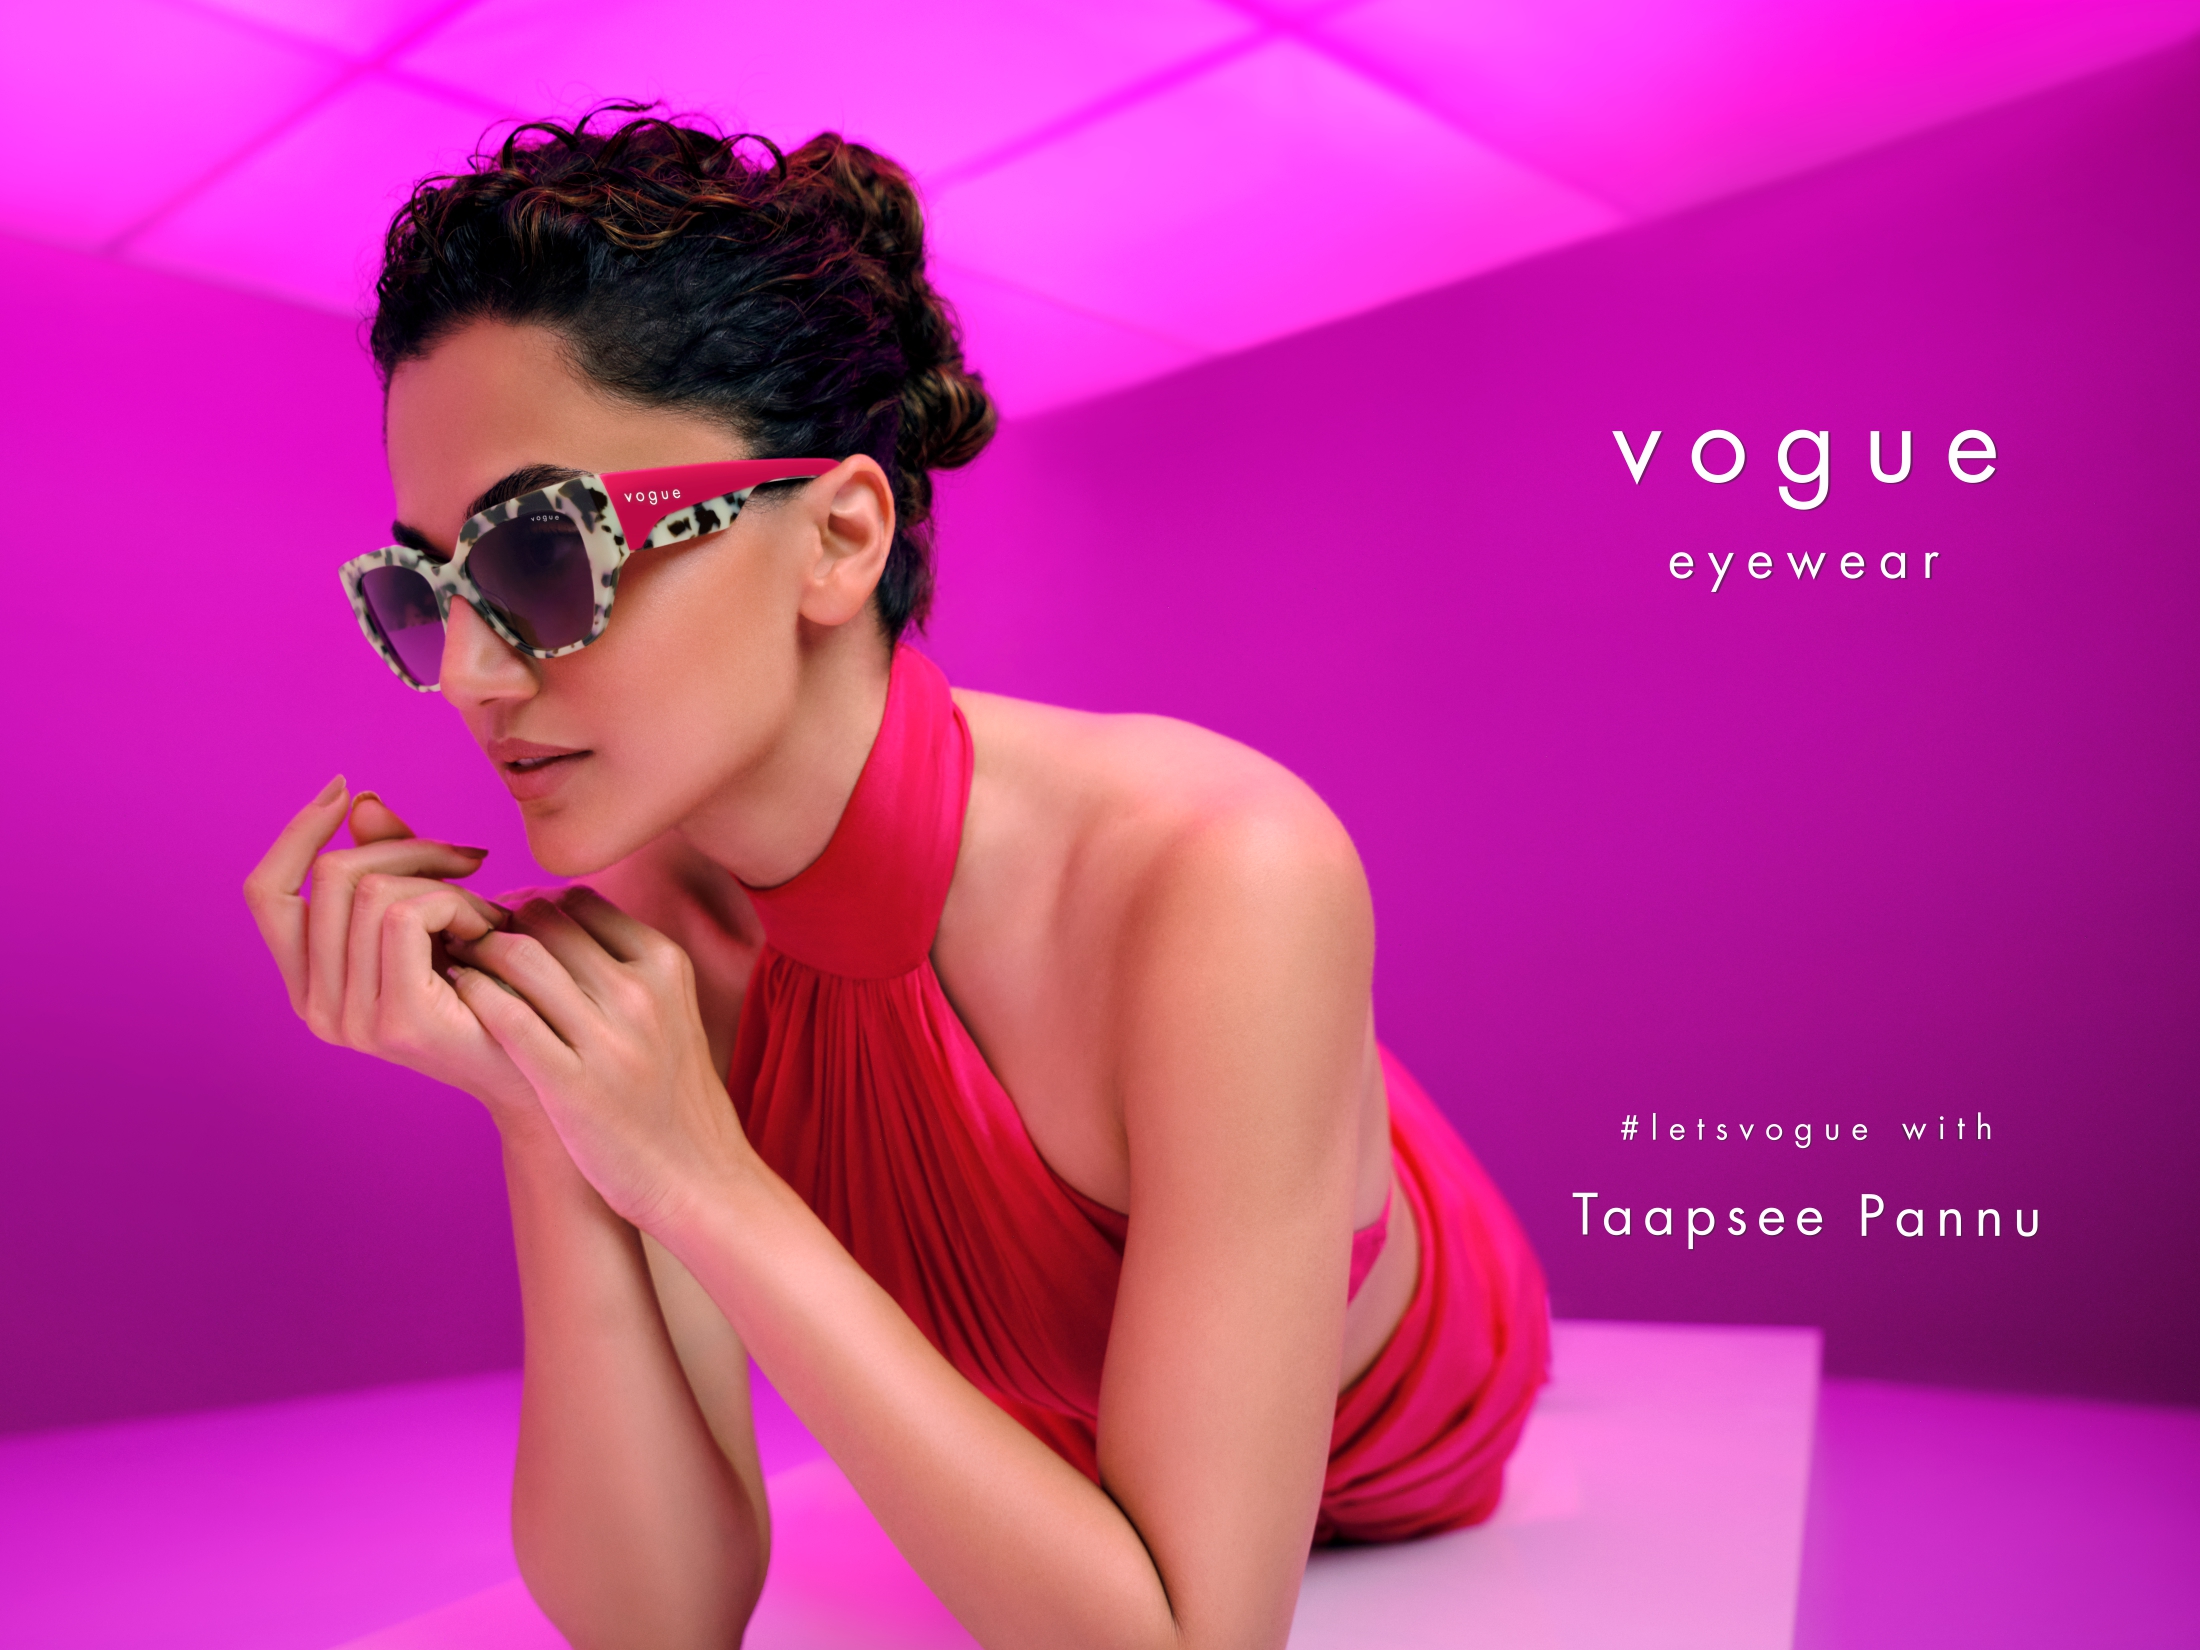 Taapsee Pannu is the embodiment of chic and Vogue Eyewear's 50th-anniversary campaign